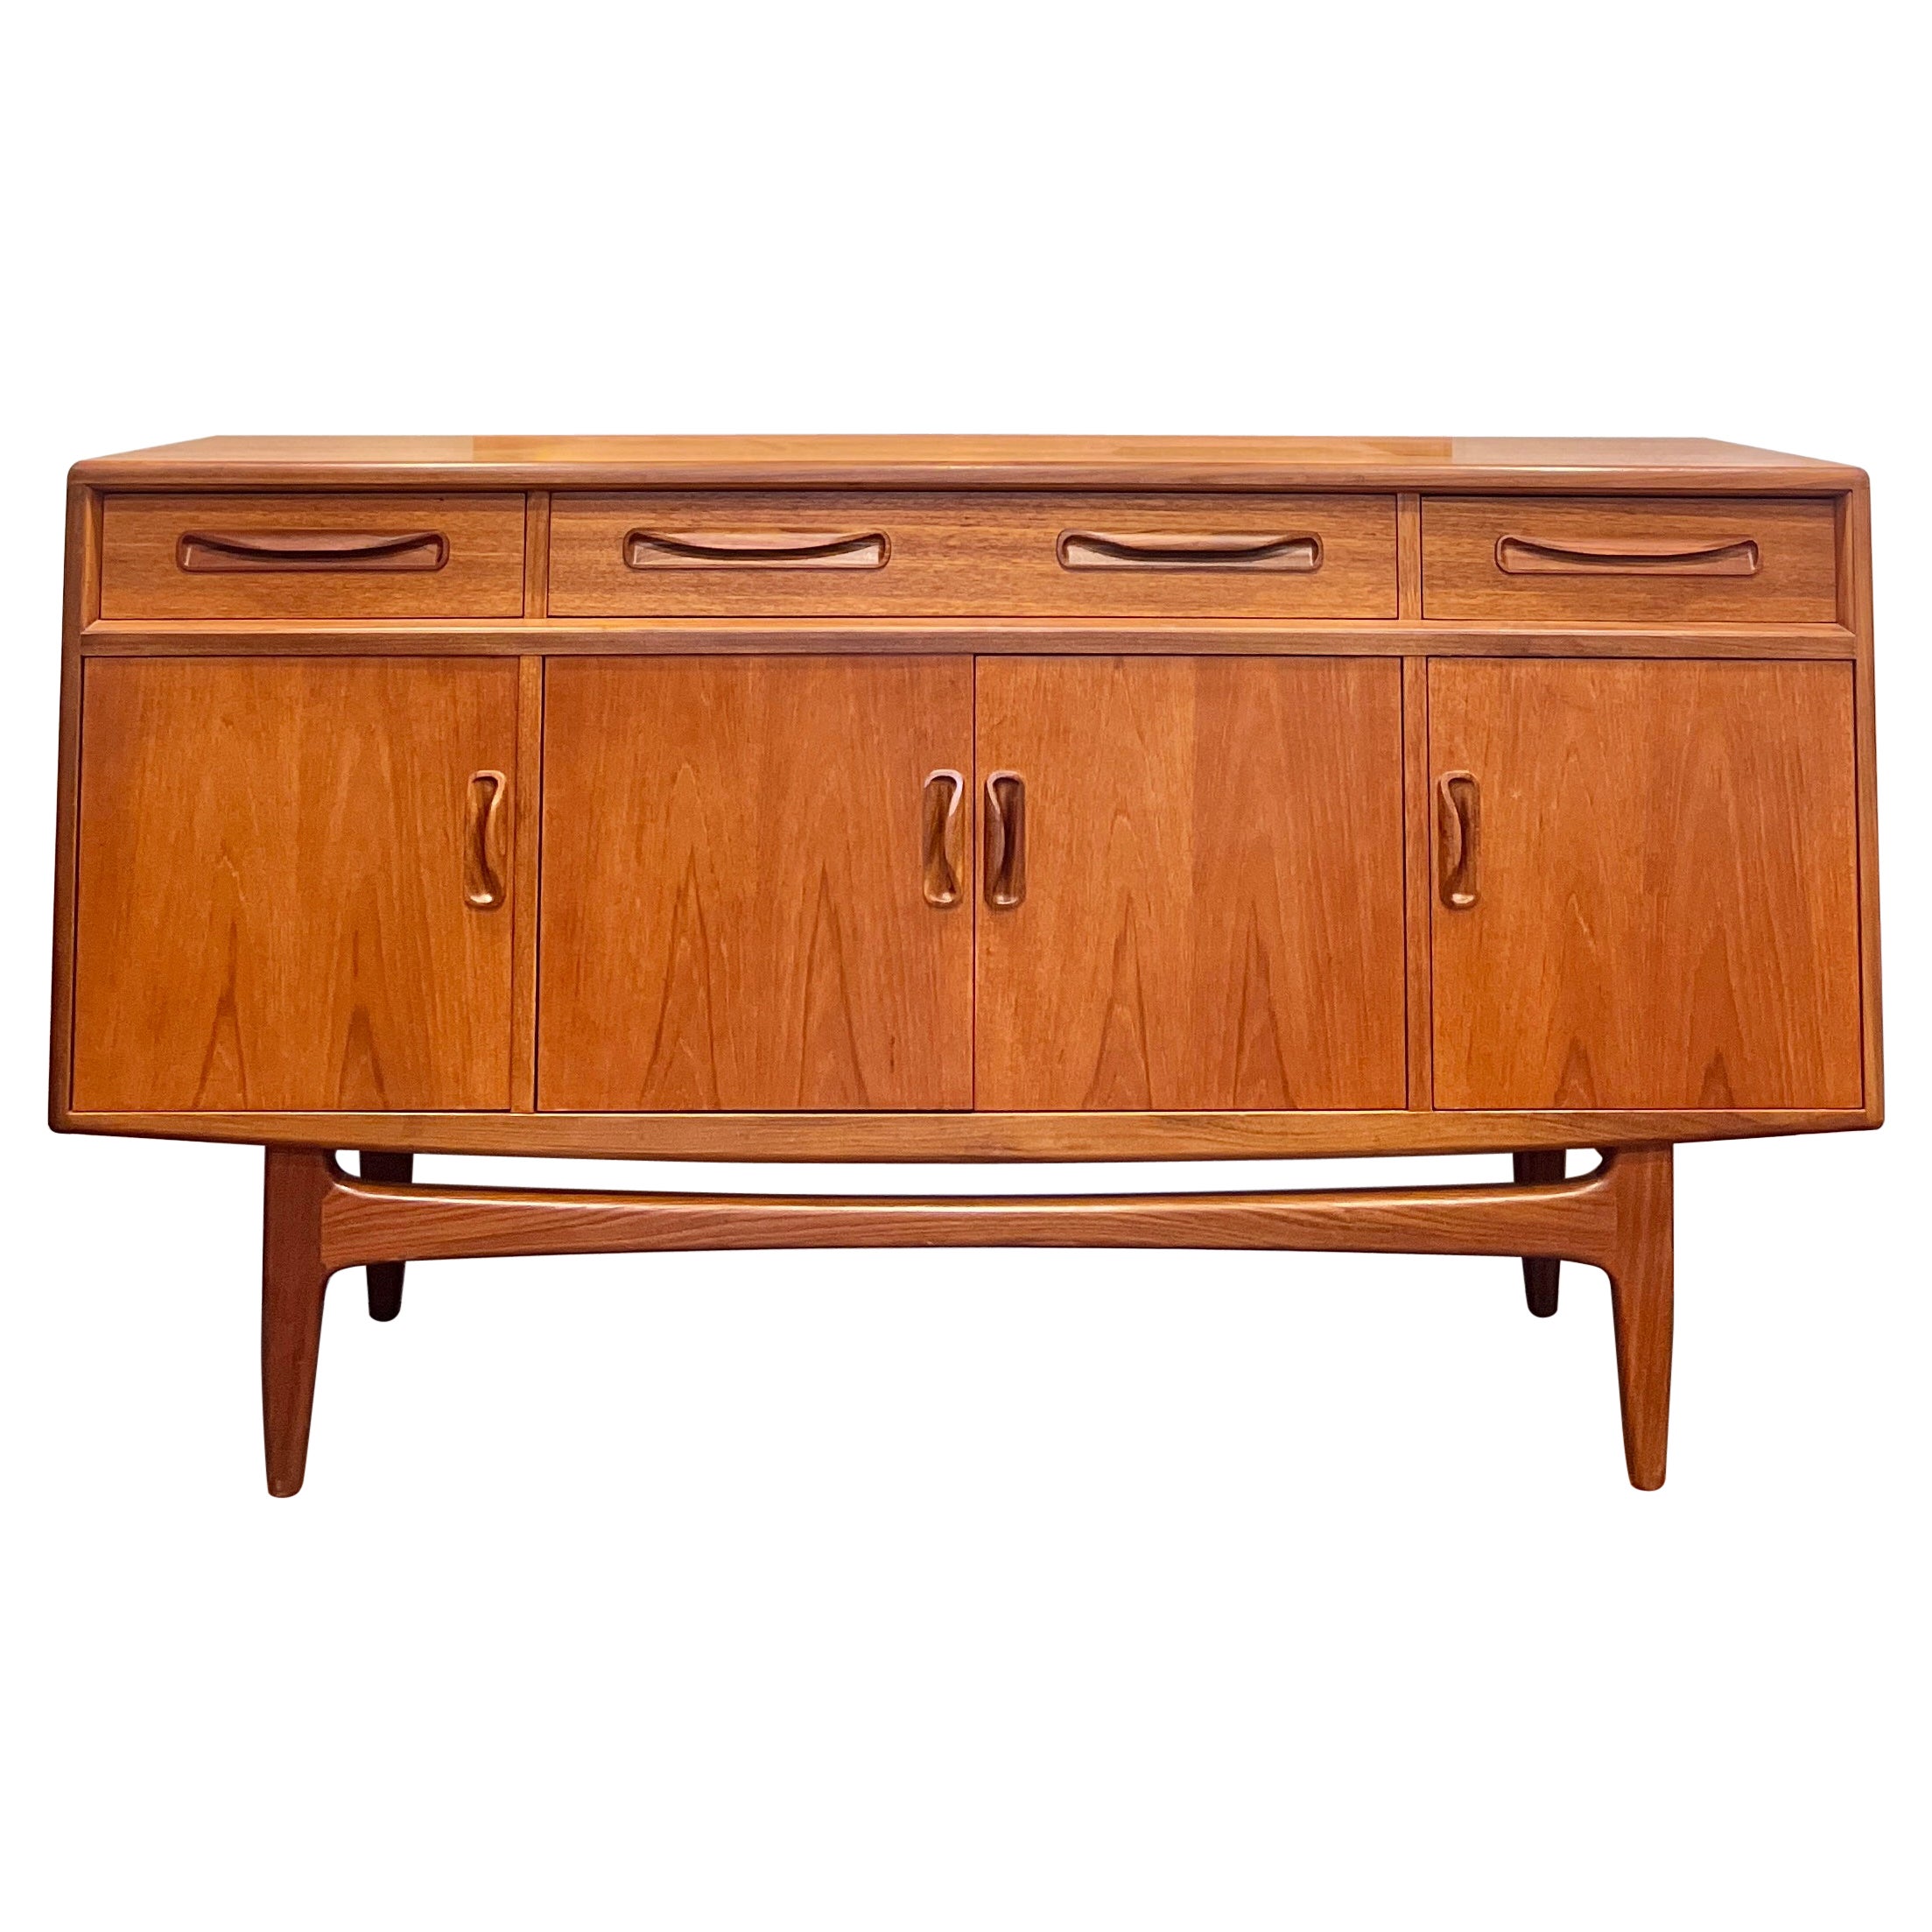 A compact teak sideboard by V. Wilkins for G-Plan, of “Fresco” collection